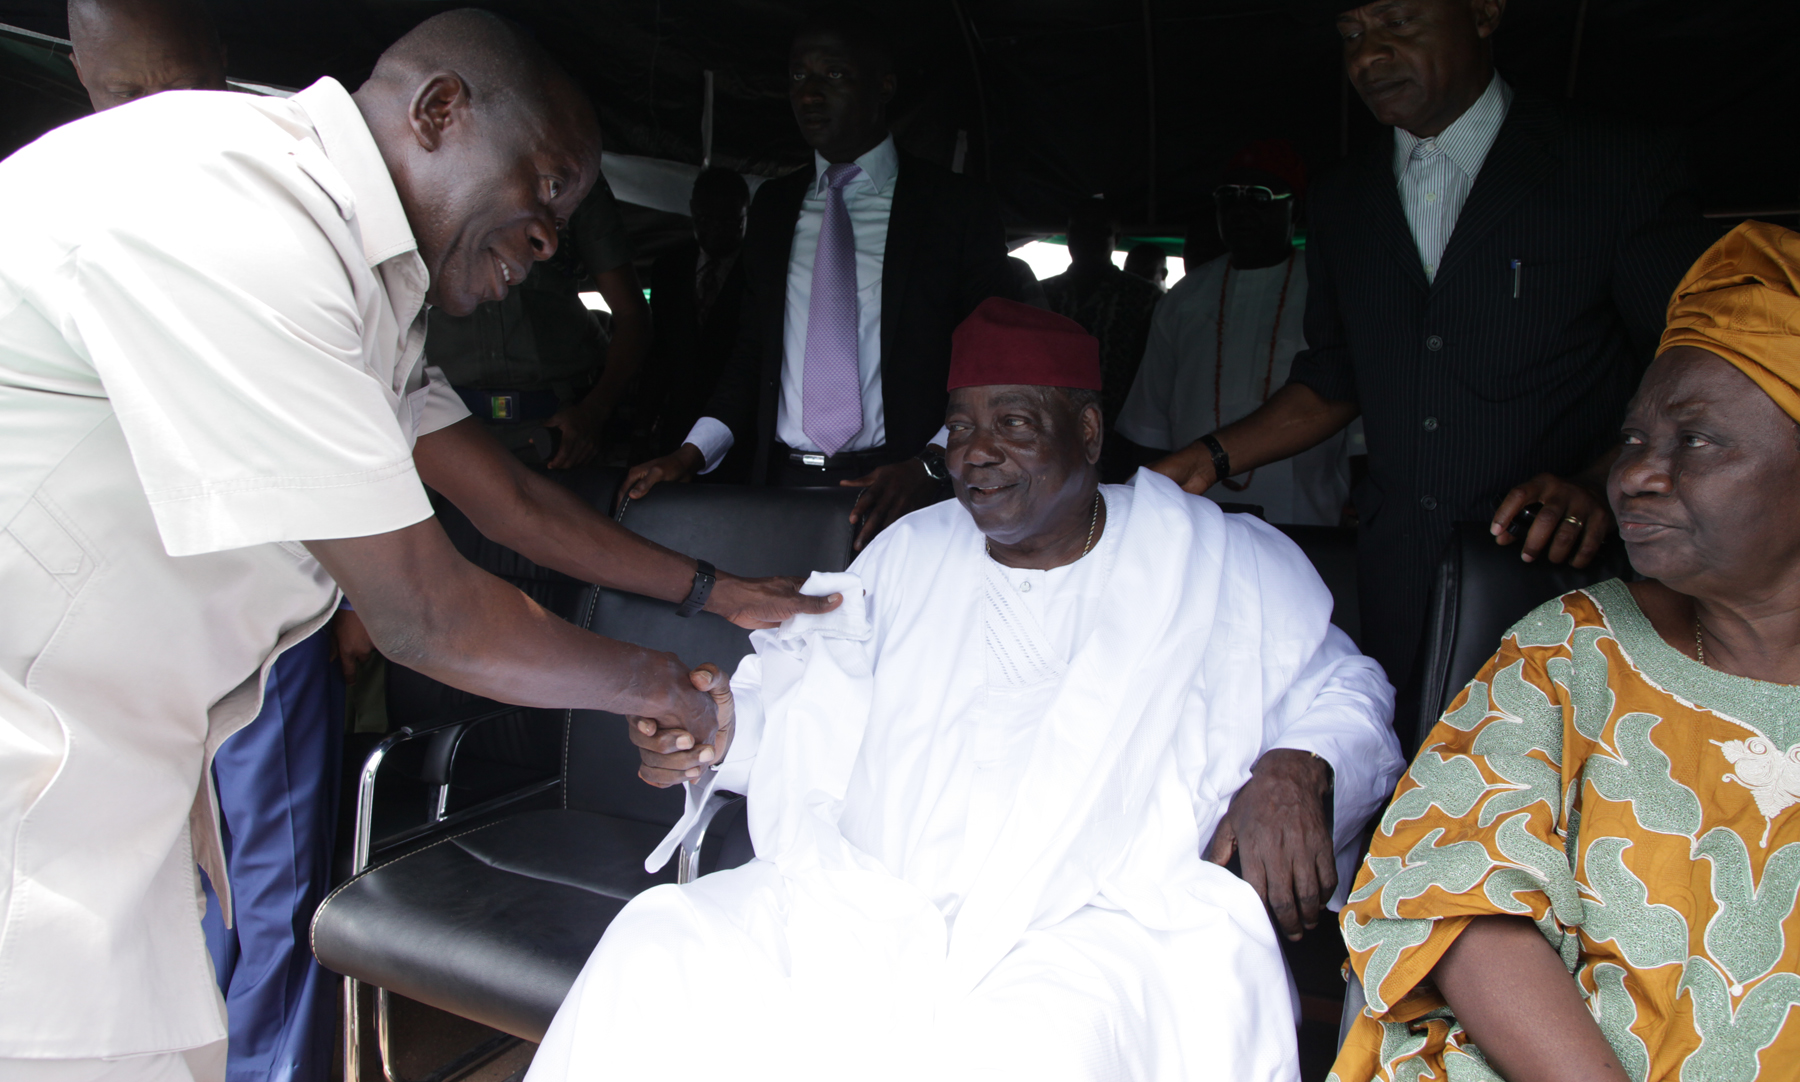 Governor Adams Oshiomhole of Edo State, Dr Samuel Ogbemudia, two-time Governor of defunct Mid-West and Bendel States and Pastor (Mrs) Clara Ogbemudia, wife of Dr Samuel Ogbemudia at the unveiling of a statue in honour of Dr. Samuel Ogbemudia at the state-owned stadium in Benin City on Wednesday.Governor Adams Oshiomhole of Edo State, Dr Samuel Ogbemudia, two-time Governor of defunct Mid-West and Bendel States and Pastor (Mrs) Clara Ogbemudia, wife of Dr Samuel Ogbemudia at the unveiling of a statue in honour of Dr. Samuel Ogbemudia at the state-owned stadium in Benin City on Wednesday.